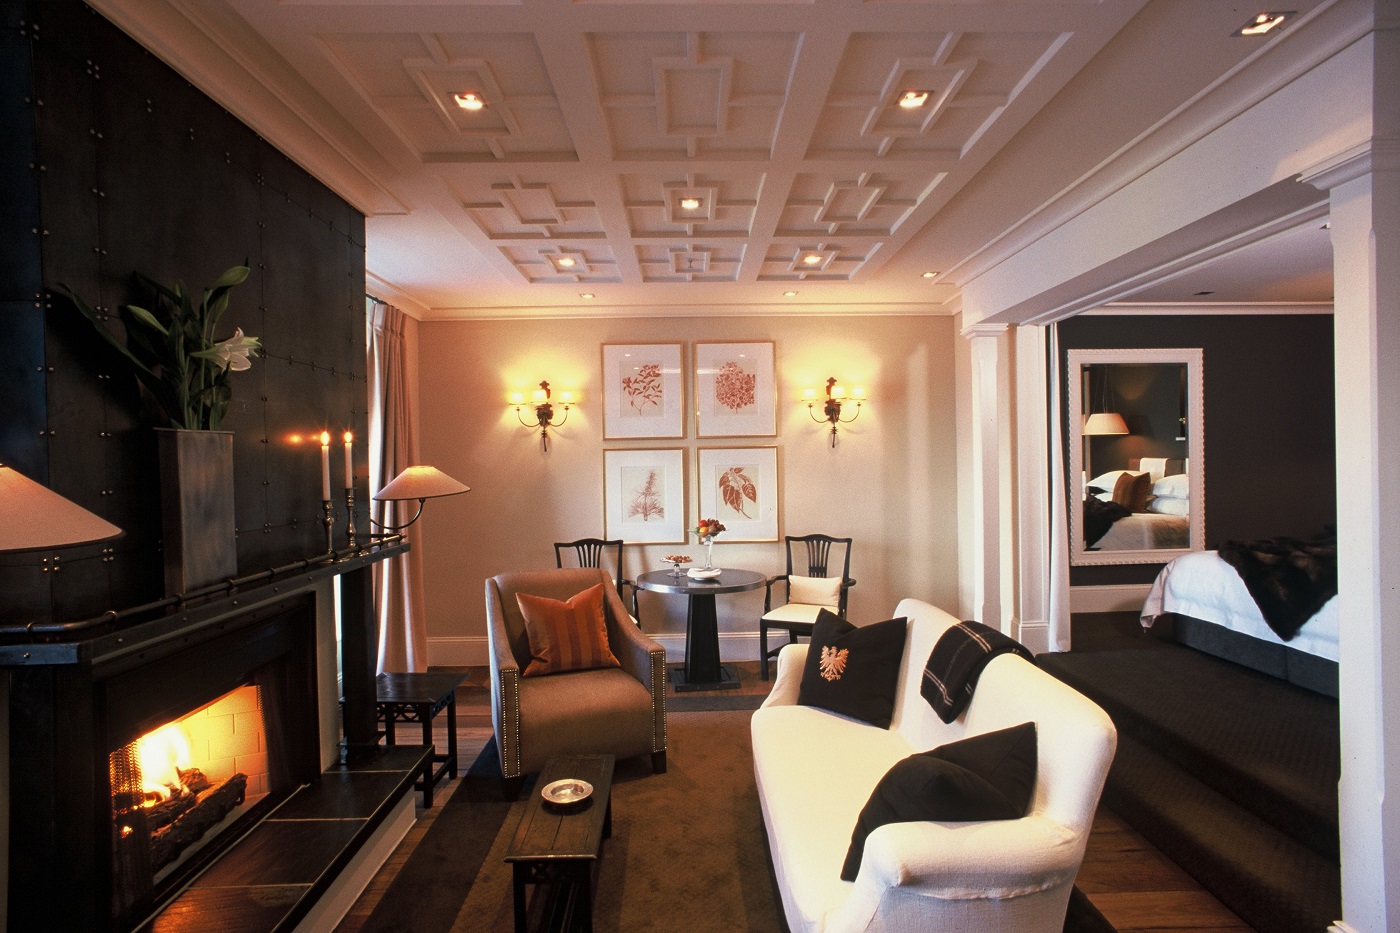 Interior view of suite at Eichardt's Private Hotel, Queenstown